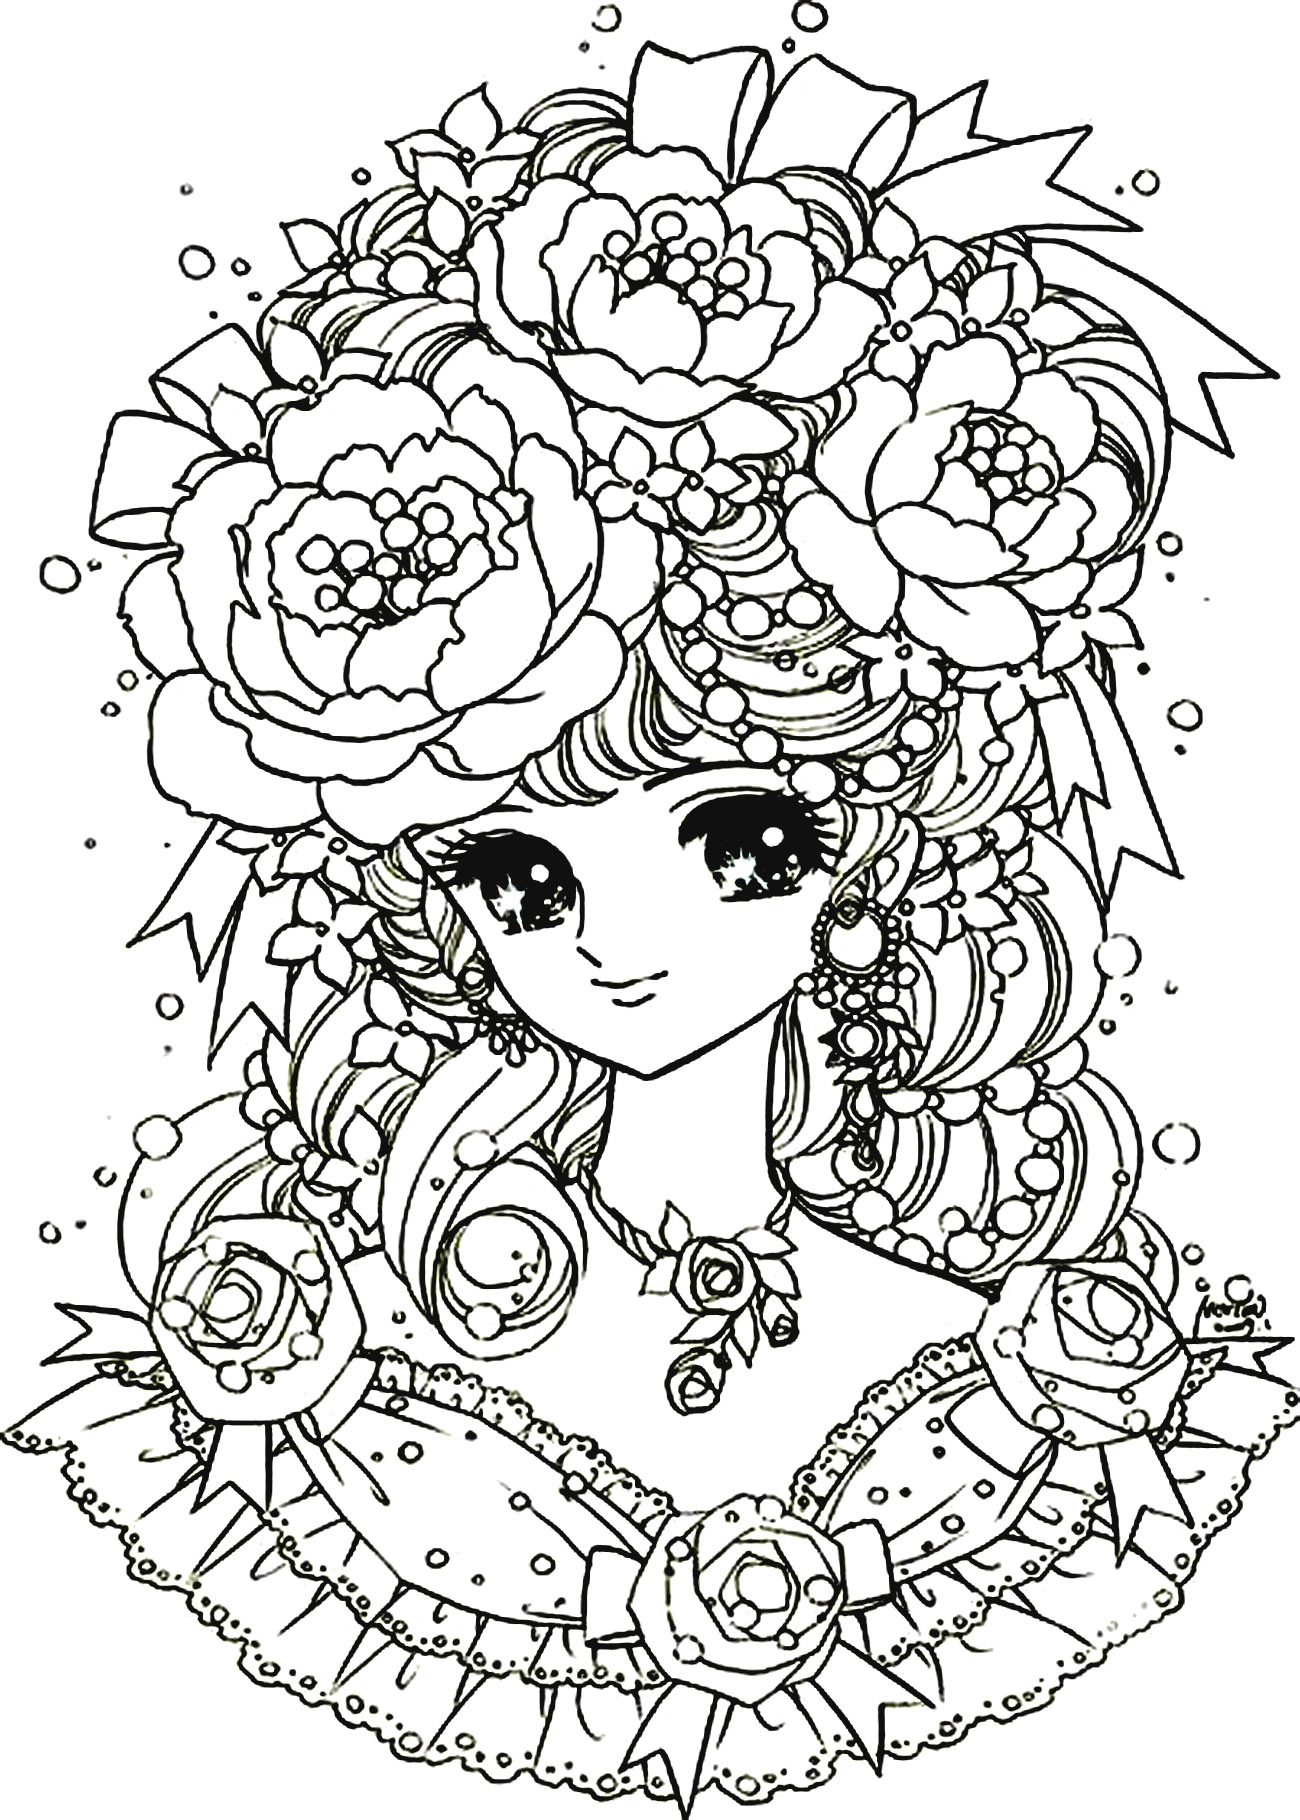 Simple Kawaii coloring page for kids